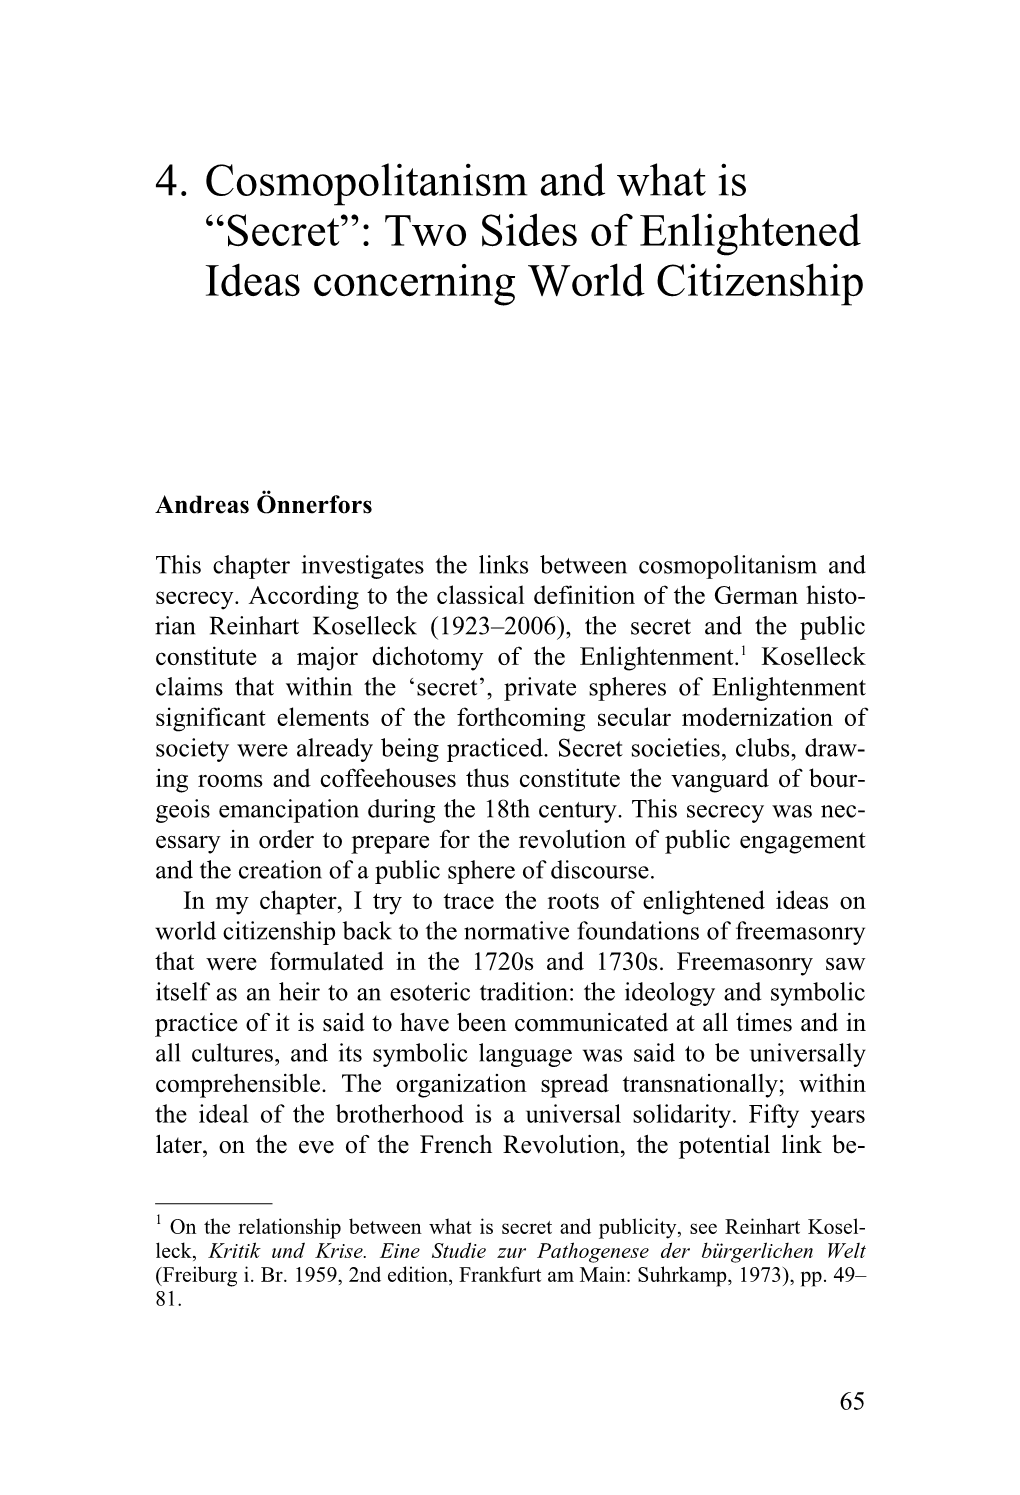 4. Cosmopolitanism and What Is “Secret”: Two Sides of Enlightened Ideas Concerning World Citizenship